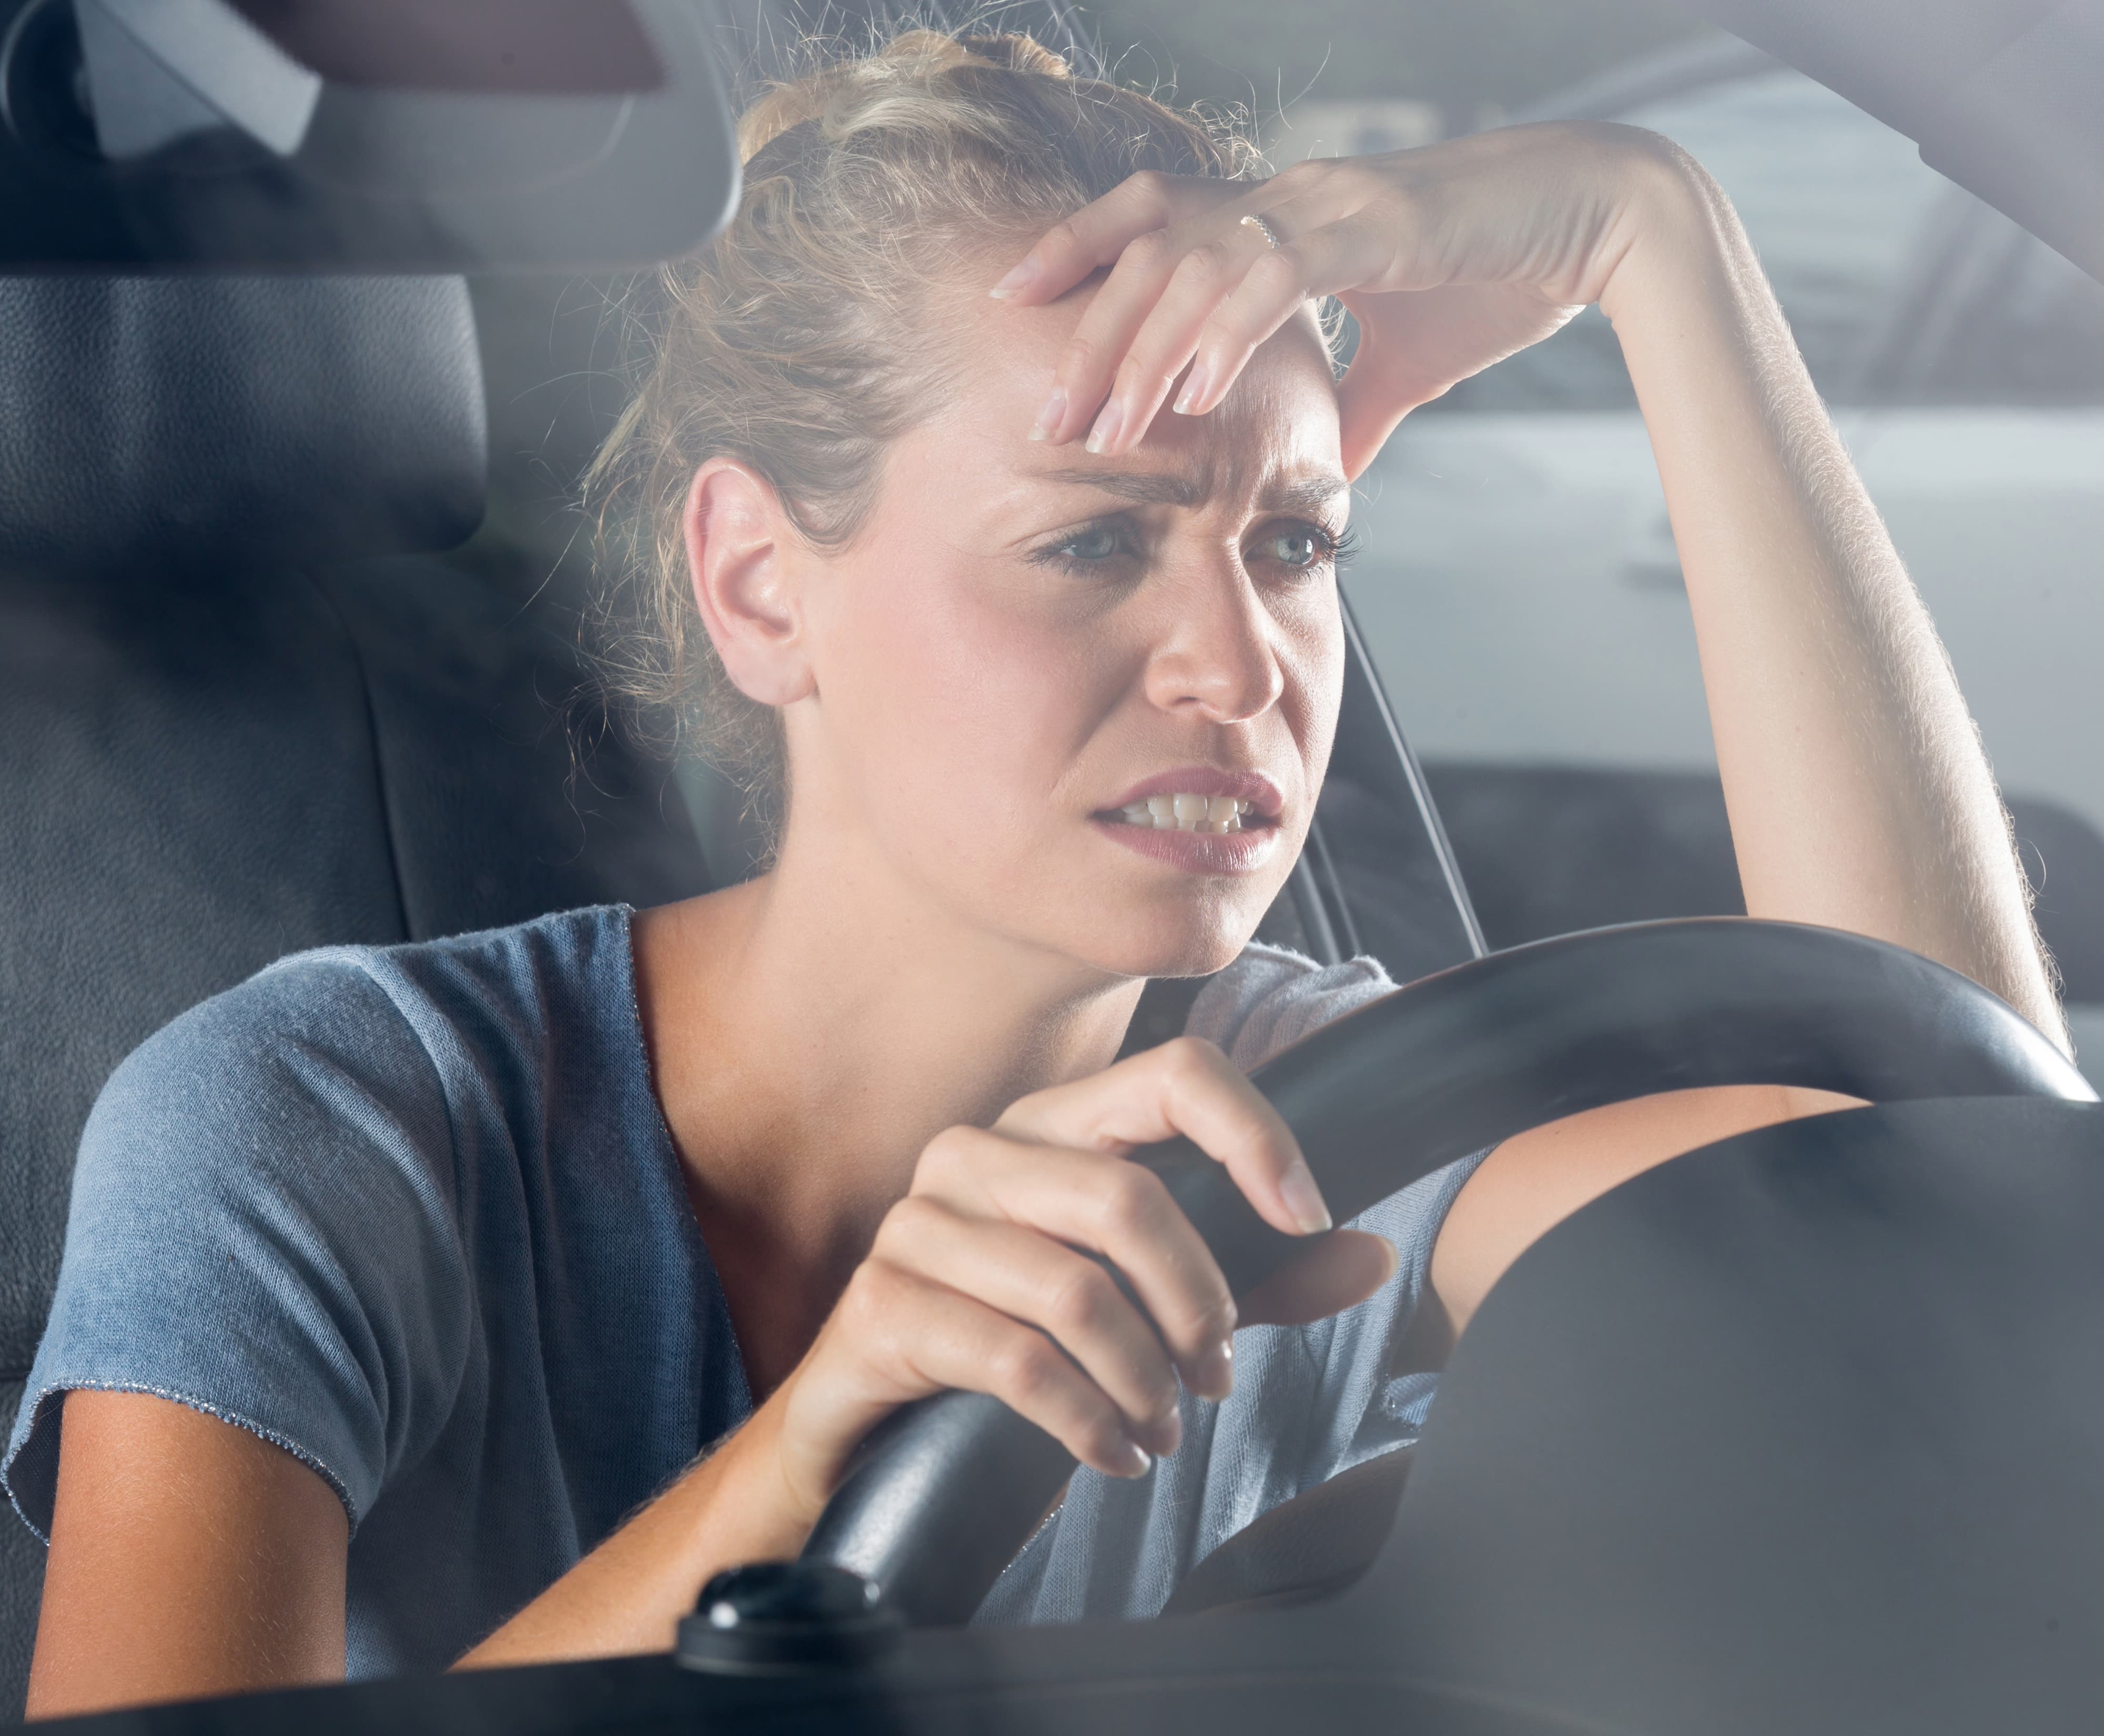 Whining, complaining, and upset woman in road traffic jam